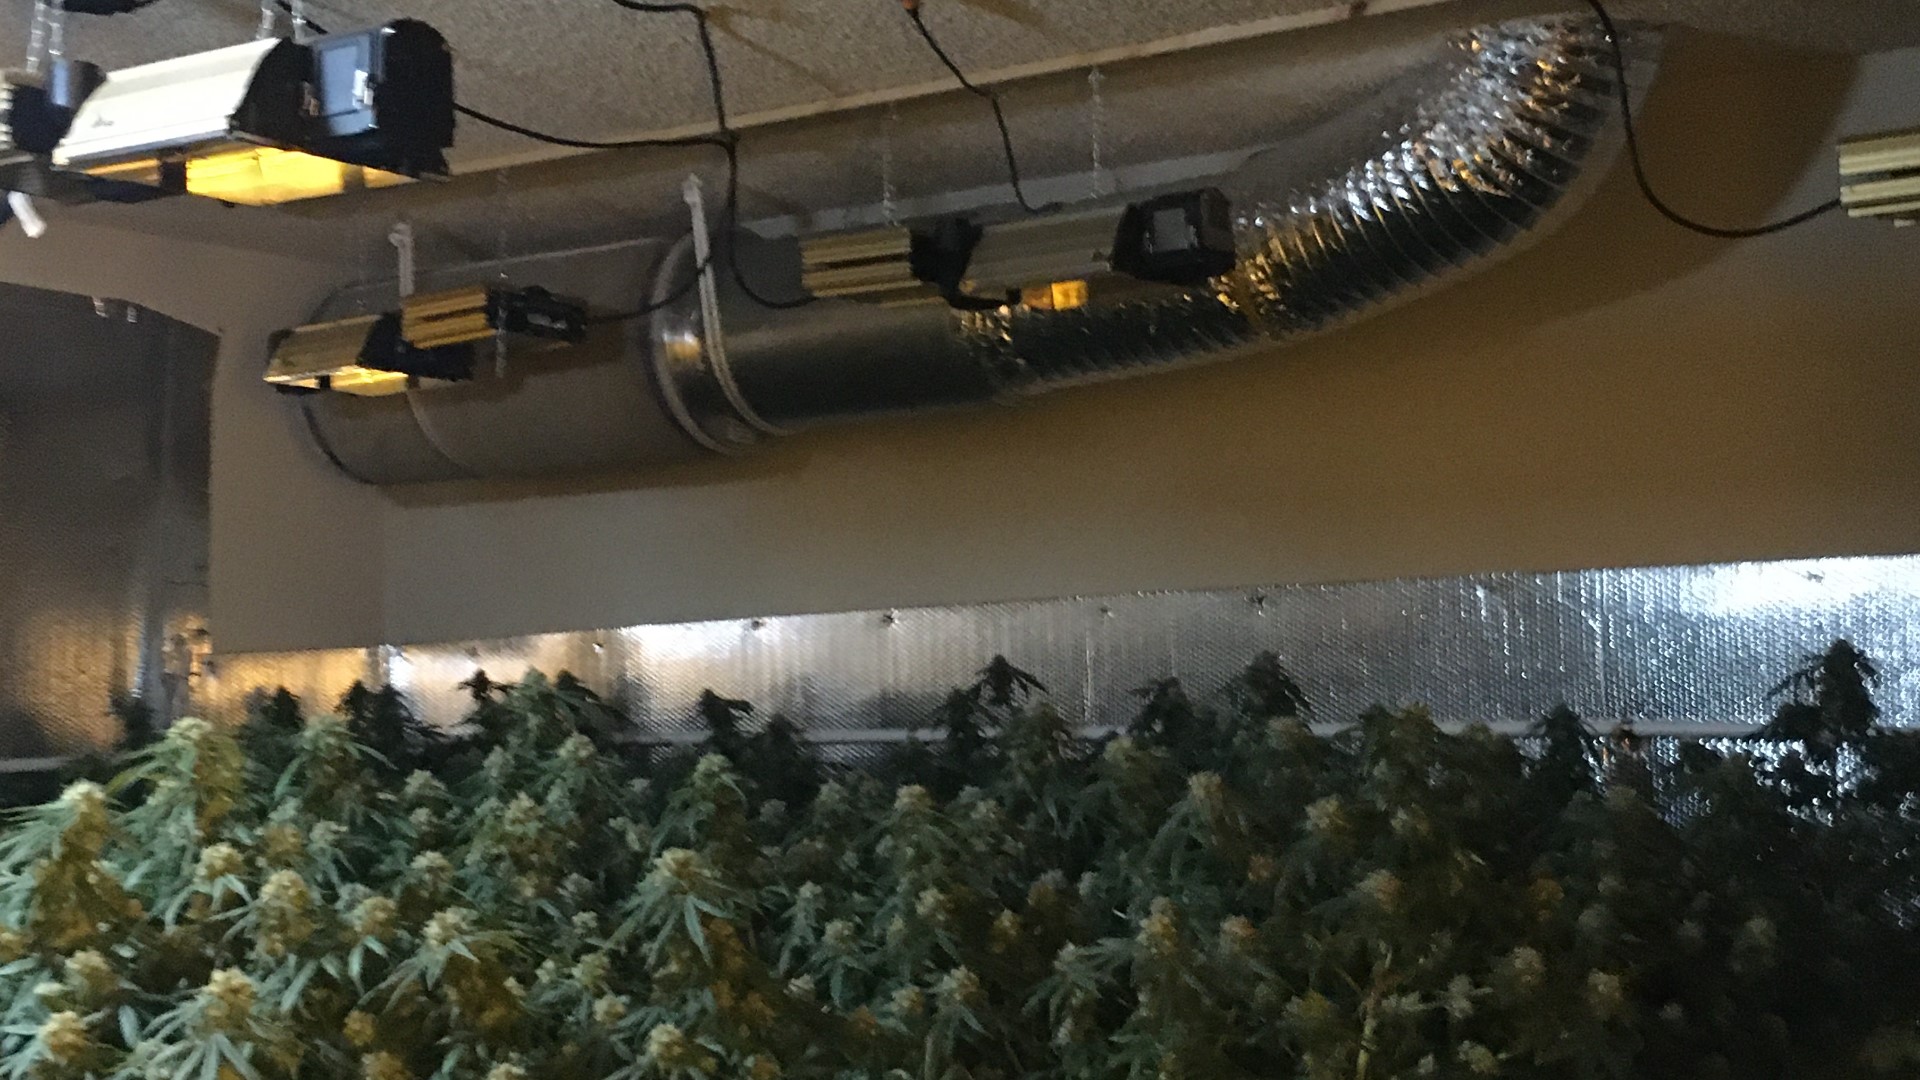 Sacramento police said officers will often find illegal marijuana grows to find makeshift electrical boxes that have exposed wiring, which is a fire hazard.